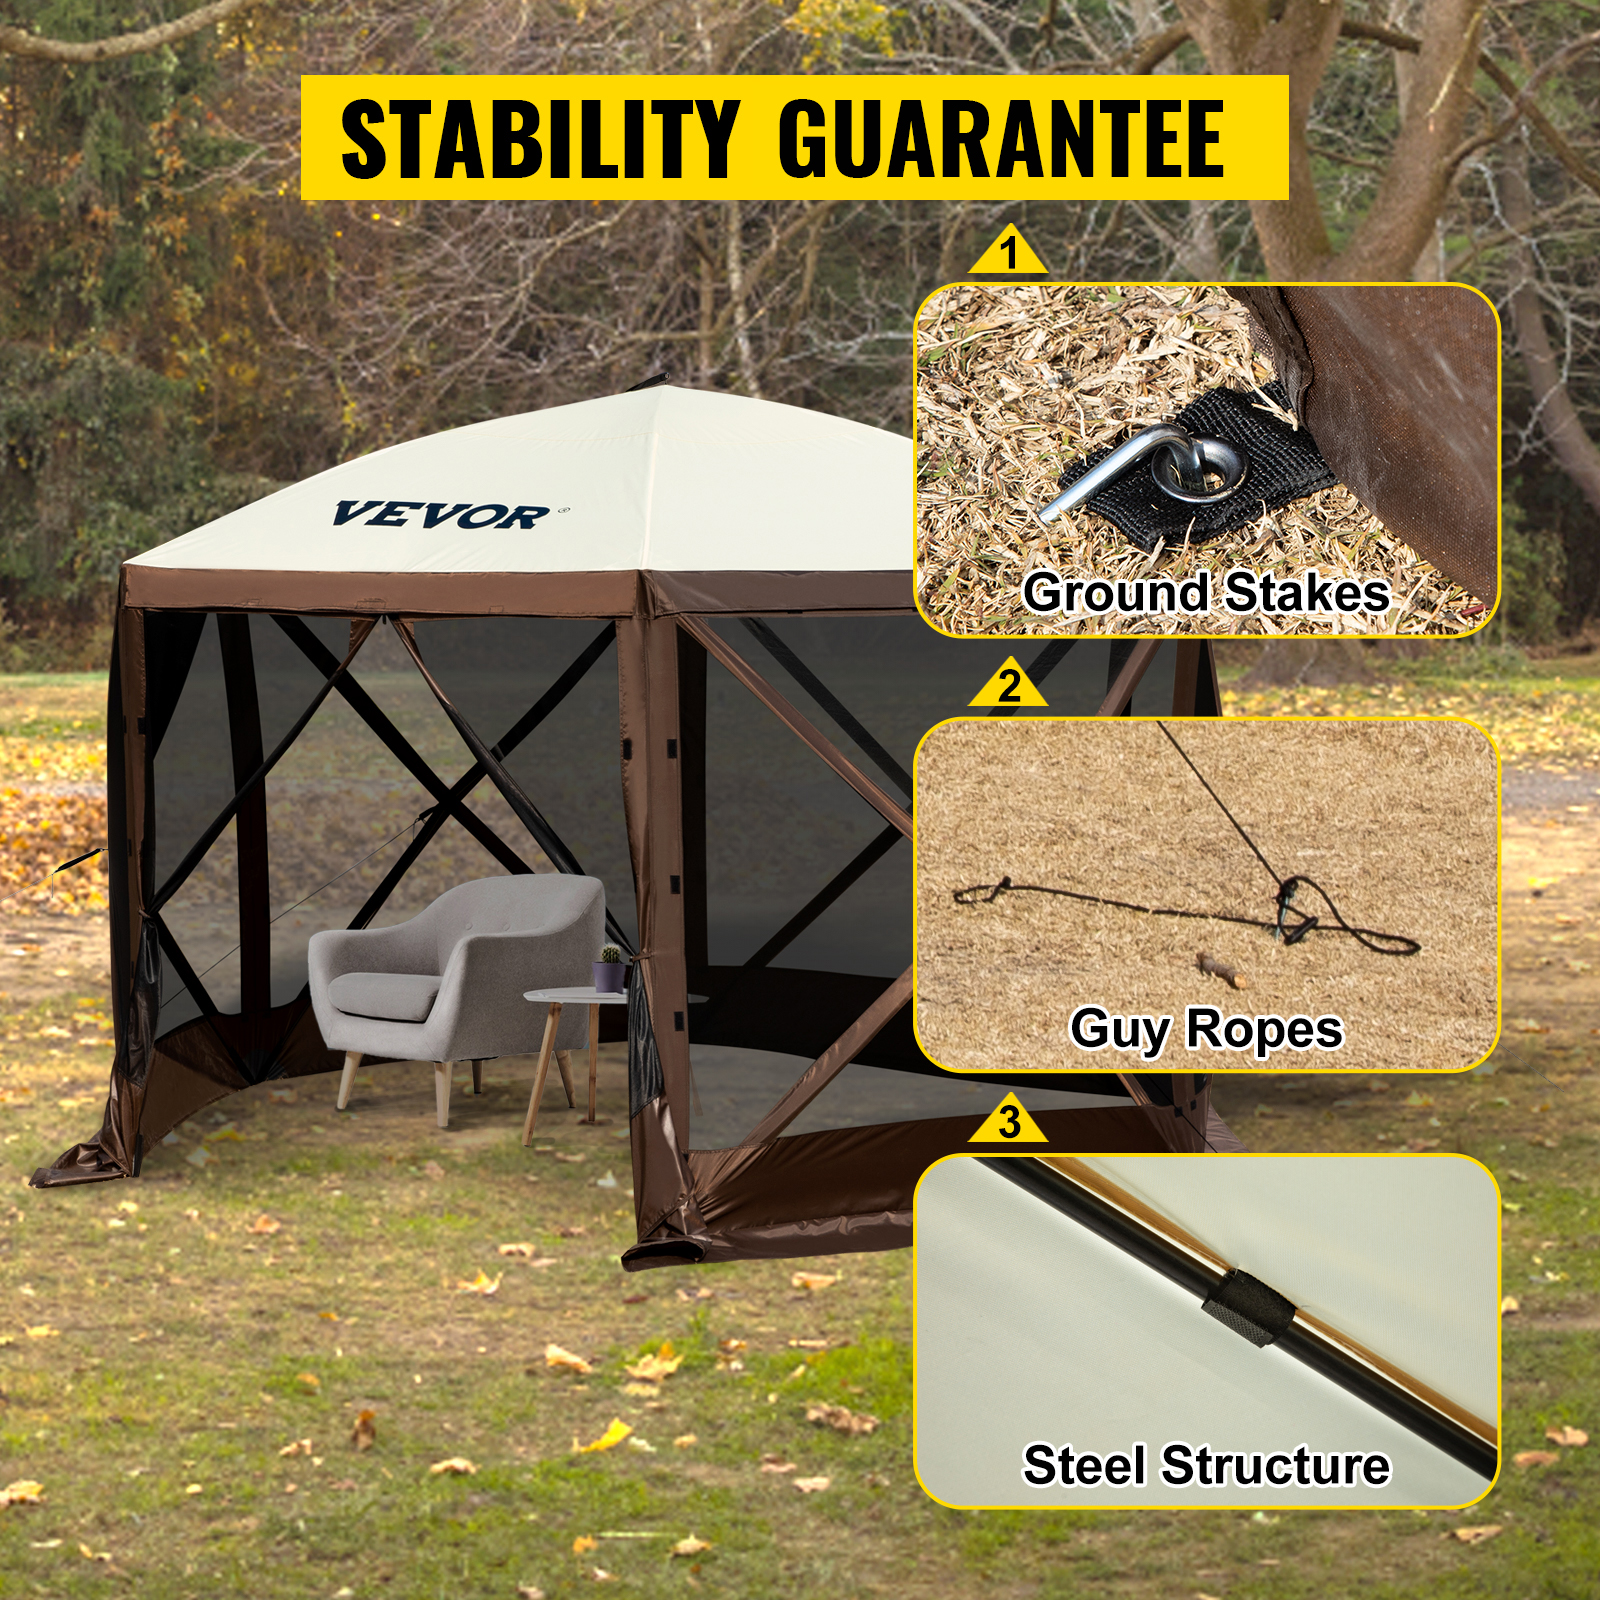 https://d2qc09rl1gfuof.cloudfront.net/product/MZY612FT12FT604DR/6-sided-canopy-shelter-m100-5.jpg